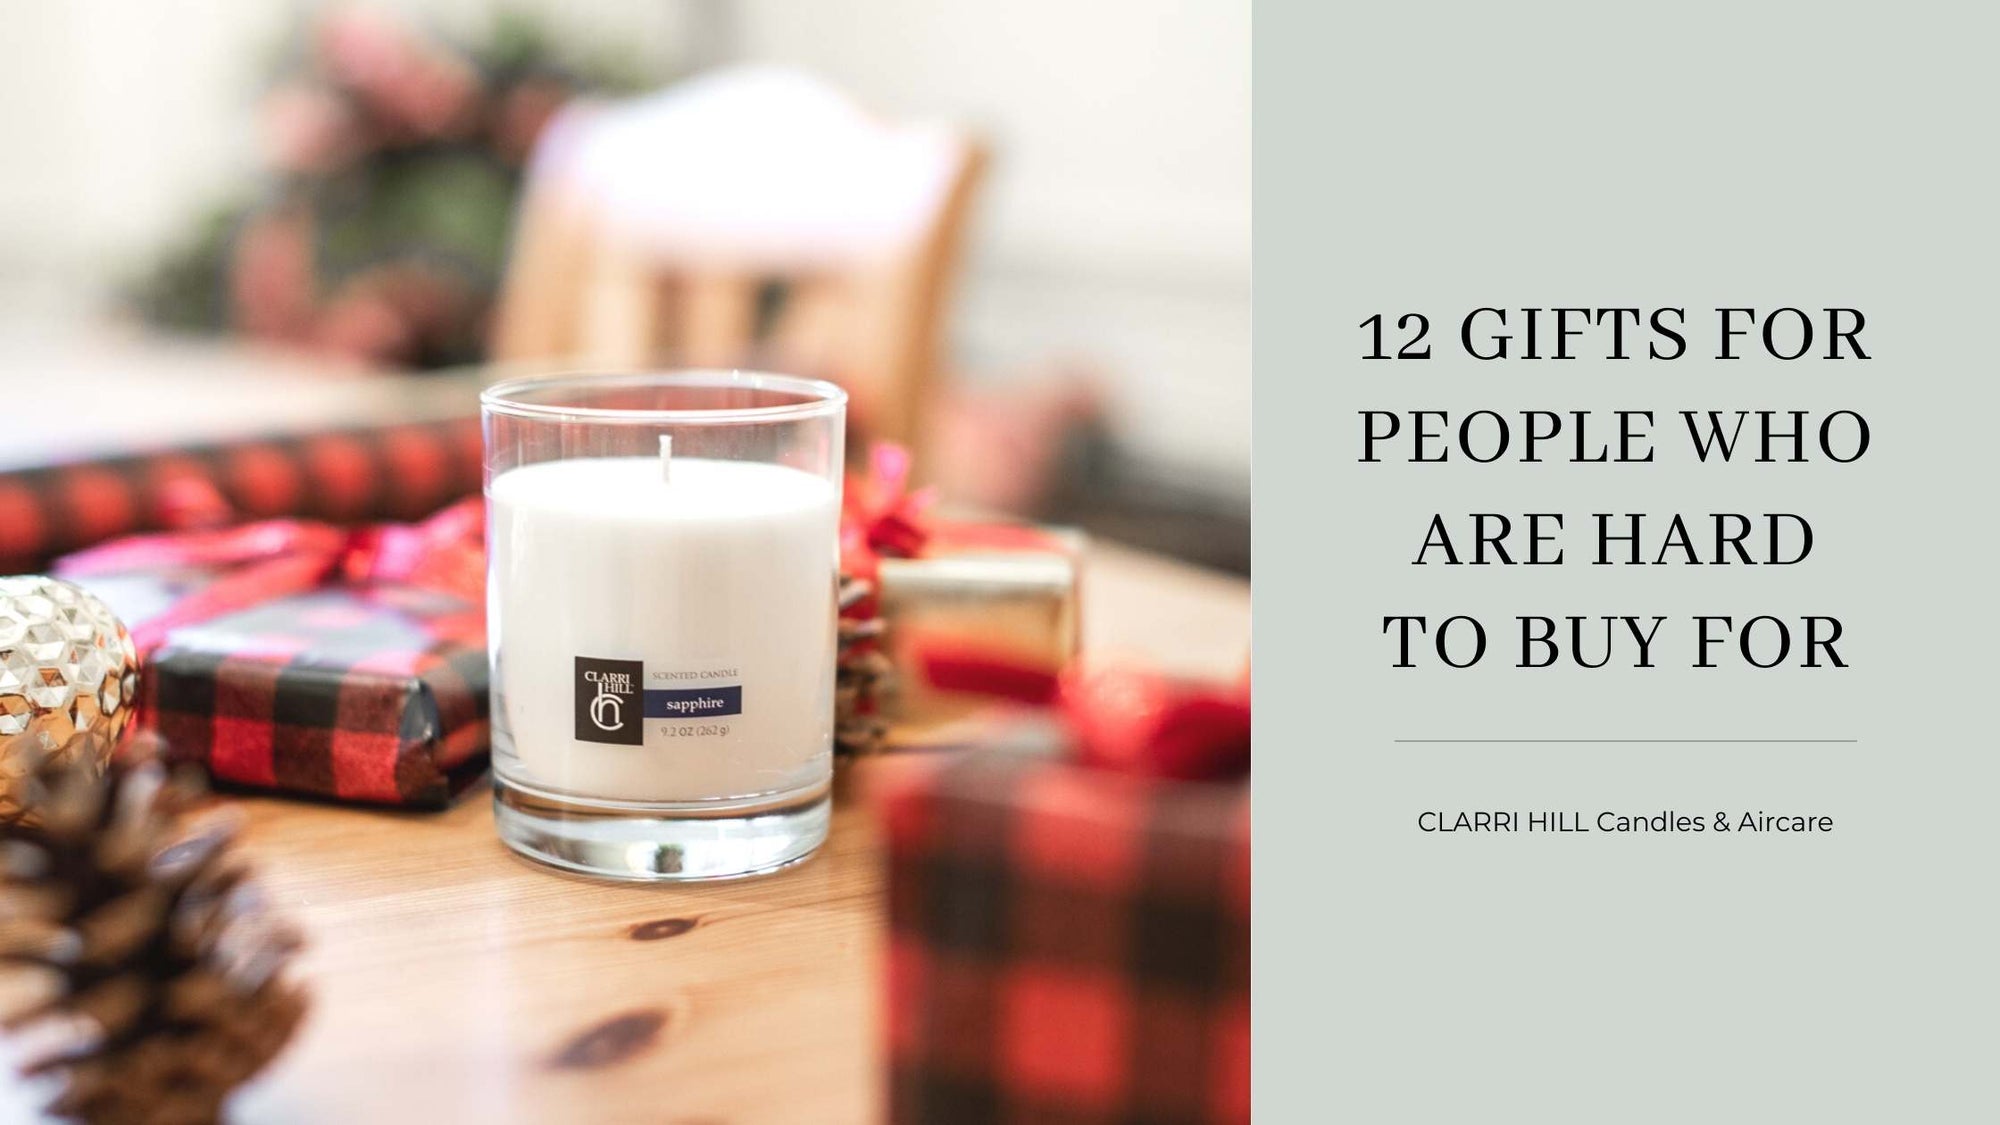 12 Gifts For People Who Are Hard To Buy For | CLARRI HILL